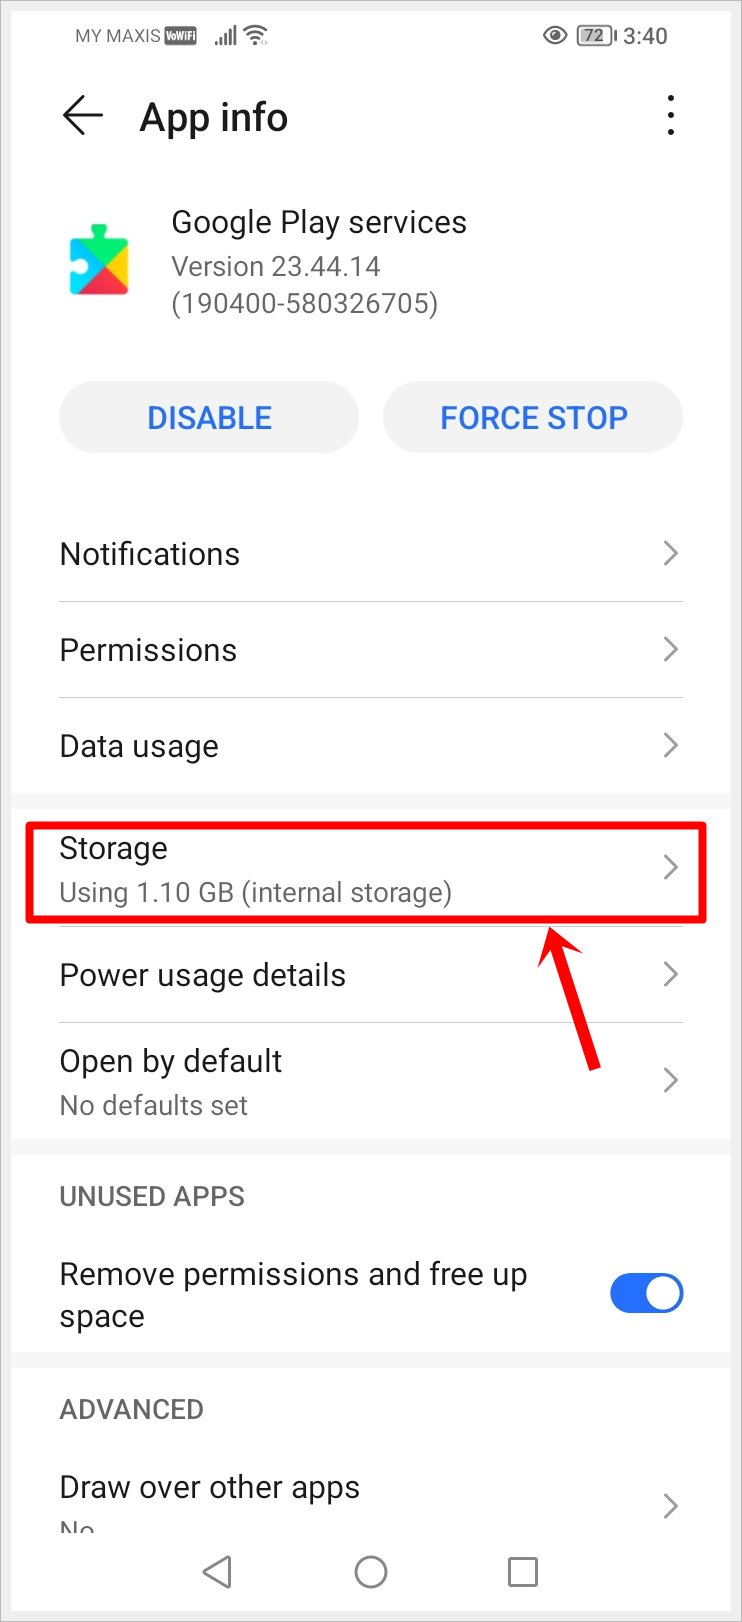 This image shows the 'Google Play services' app info. The 'Storage' option is highlighted.